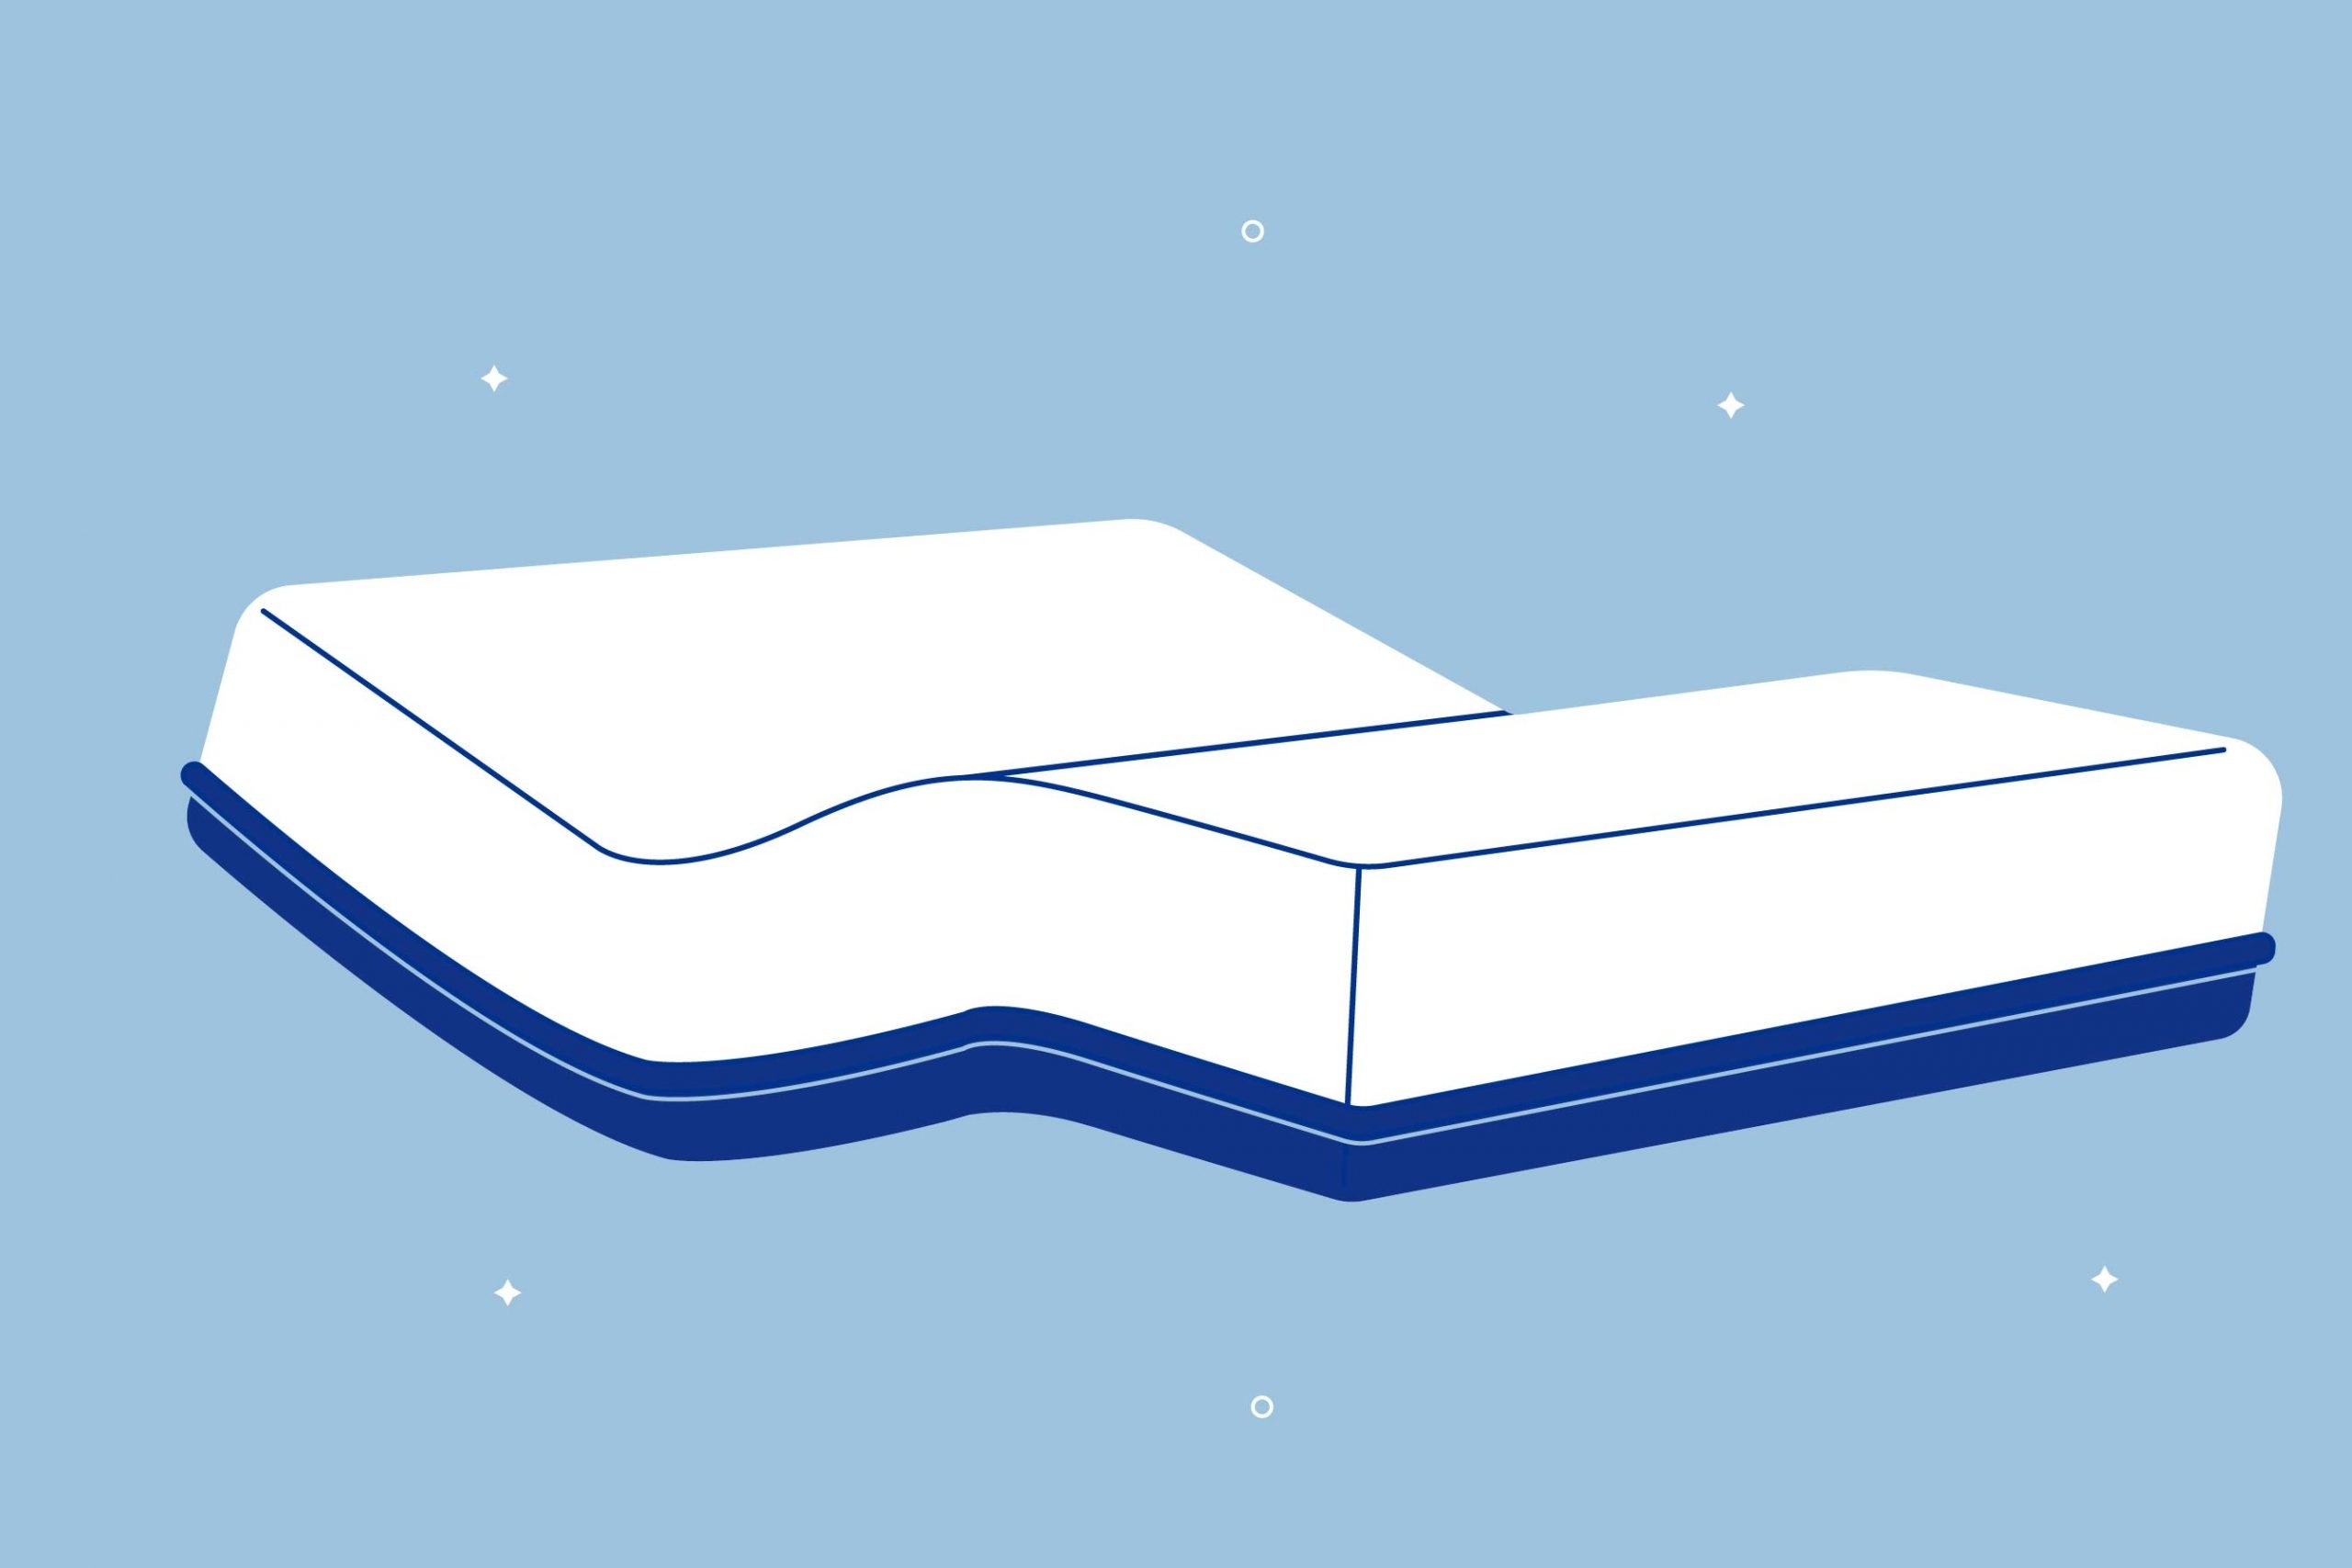 Do You Need a Special Mattress for an Adjustable Bed?